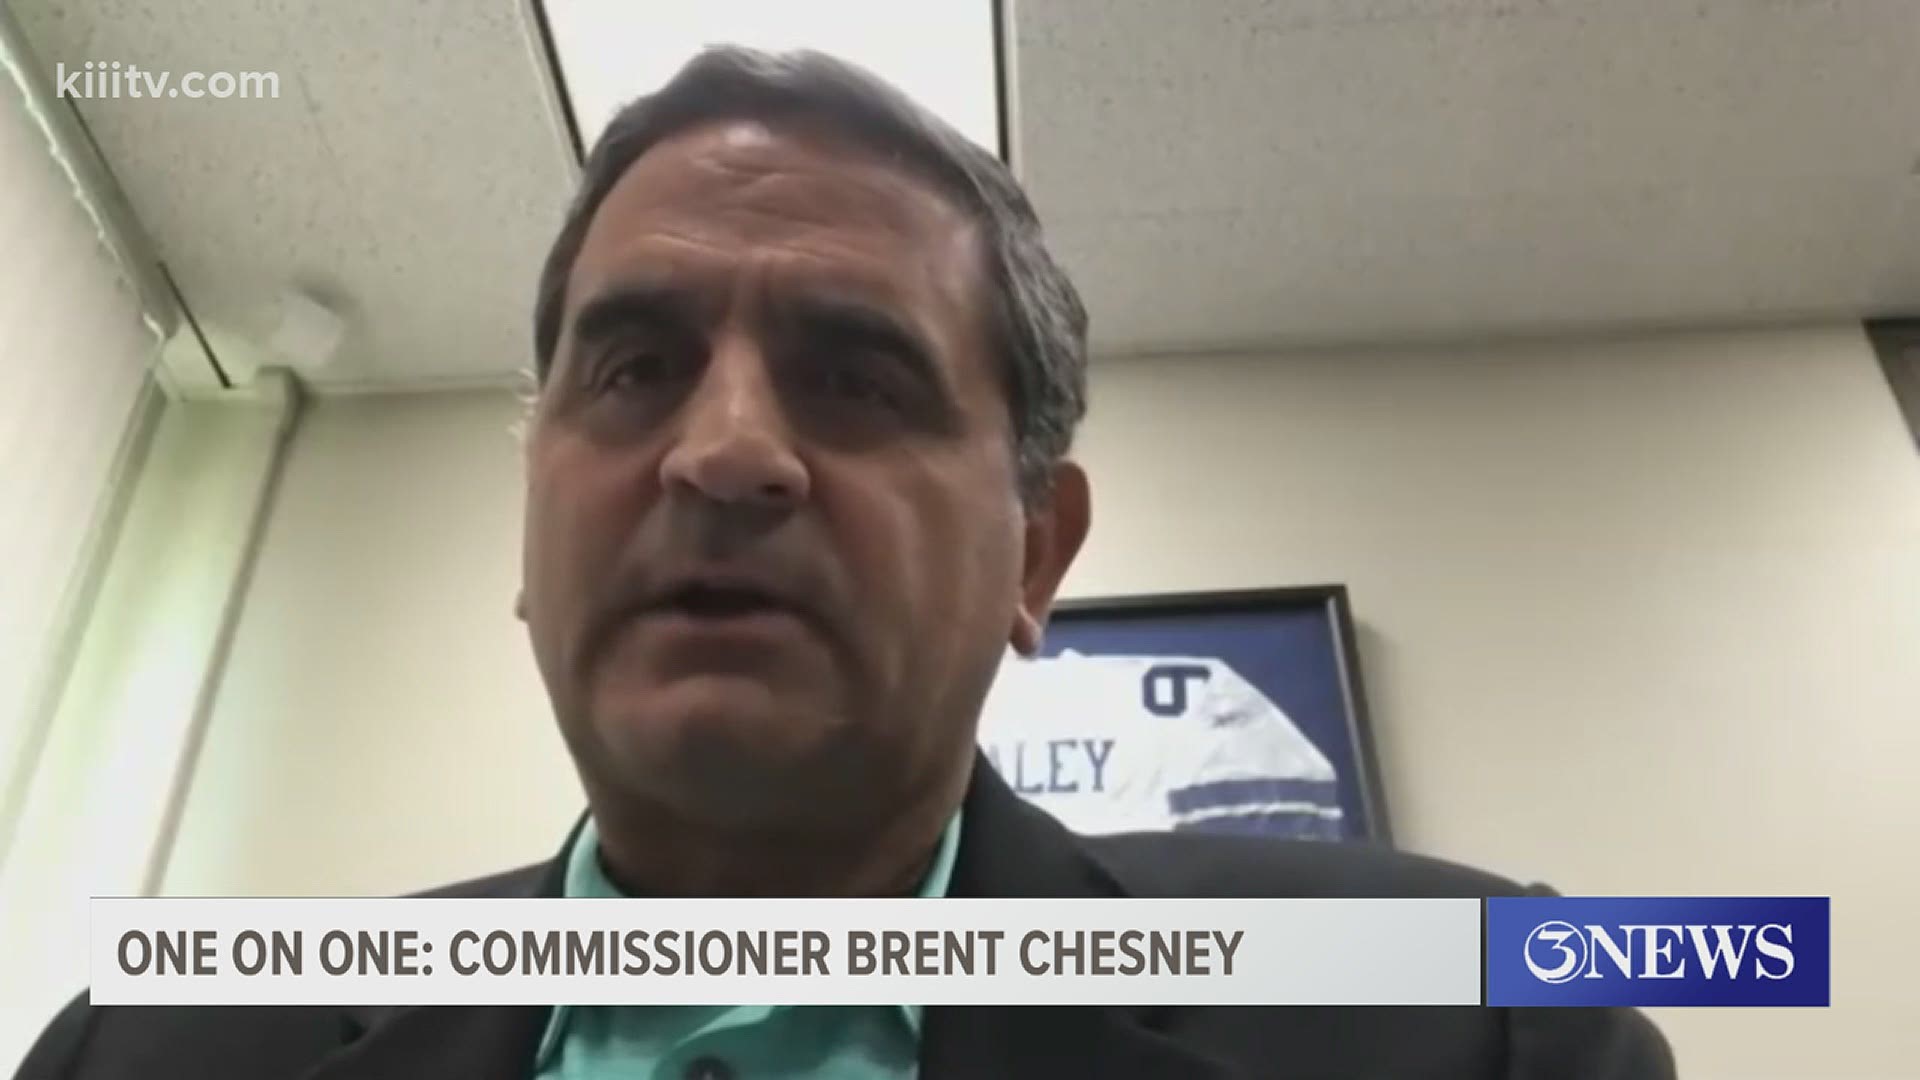 As the lone Republican on the Nueces County Commissioner's Court, Brent Chesney has had a couple of verbal scuffles in recent weeks with the Democratic County Judge.